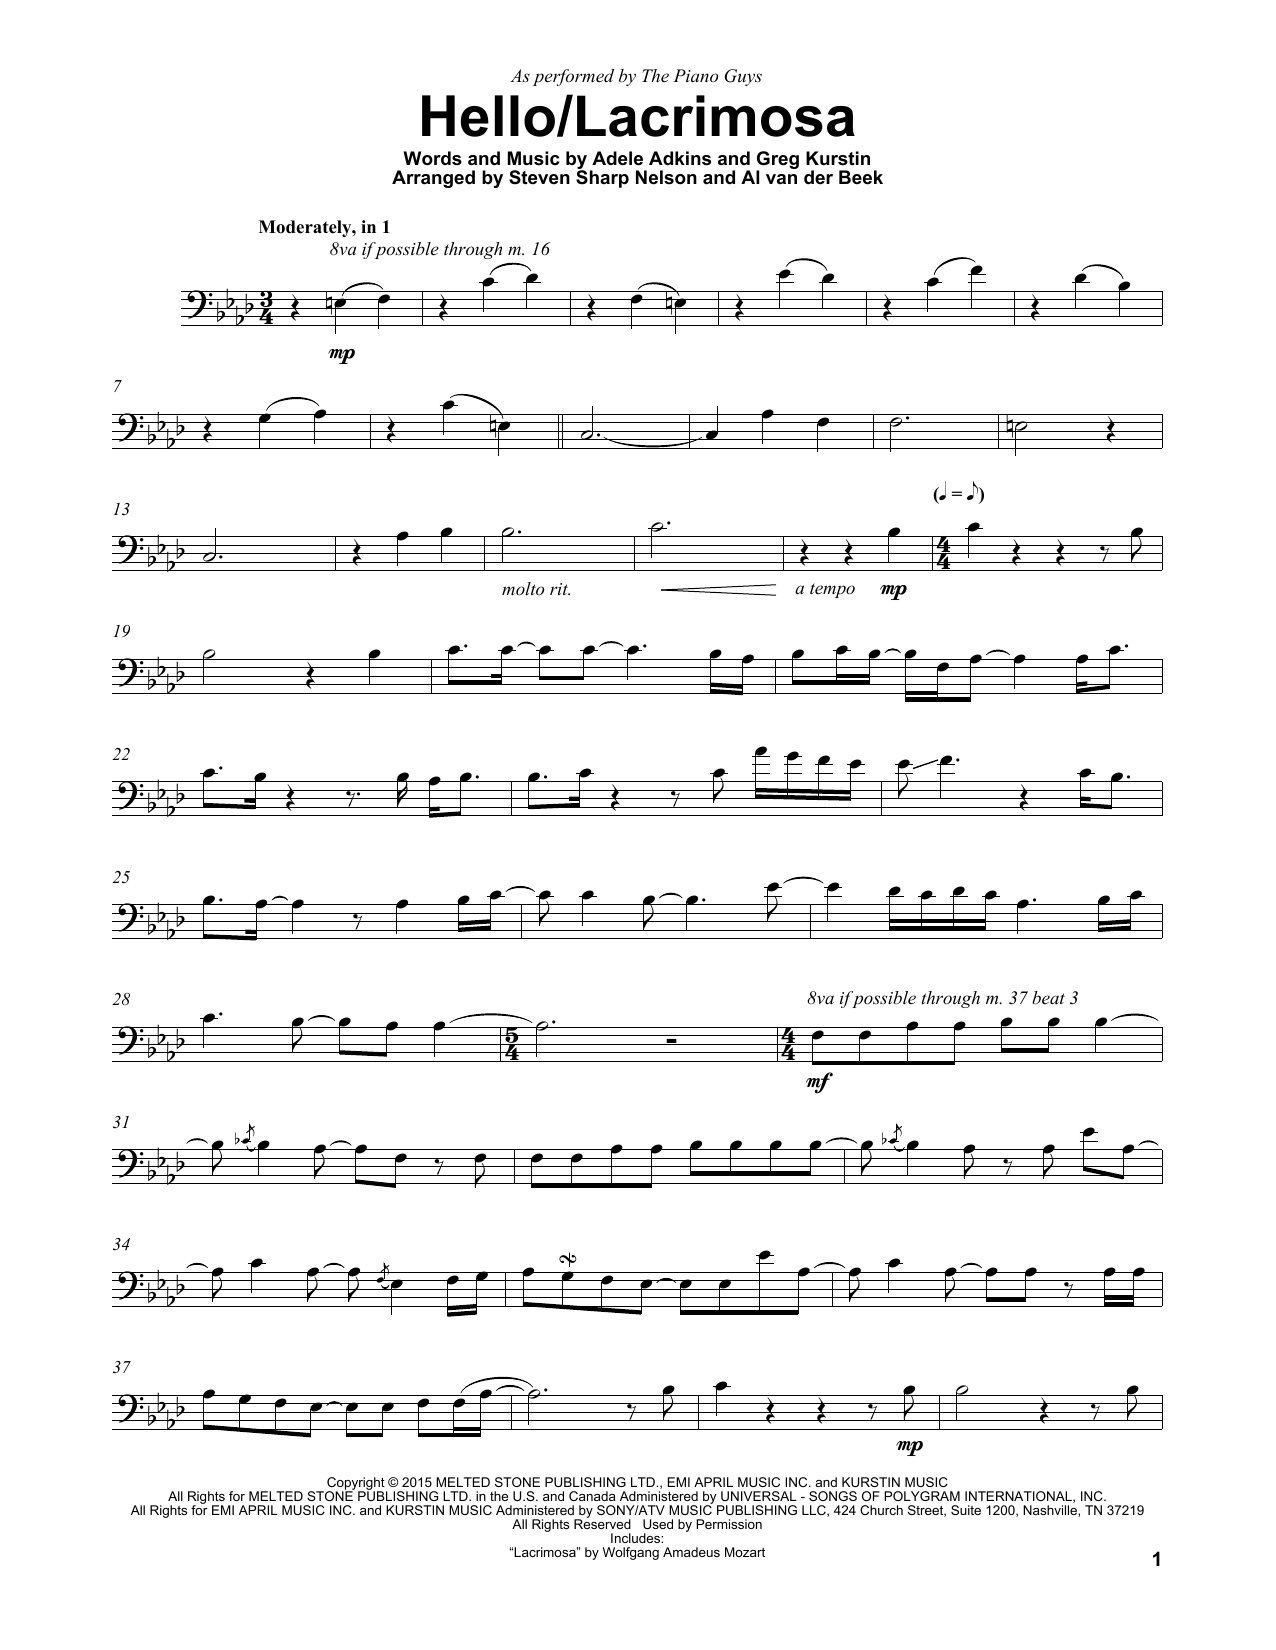 Download The Piano Guys Hello/Lacrimosa Sheet Music